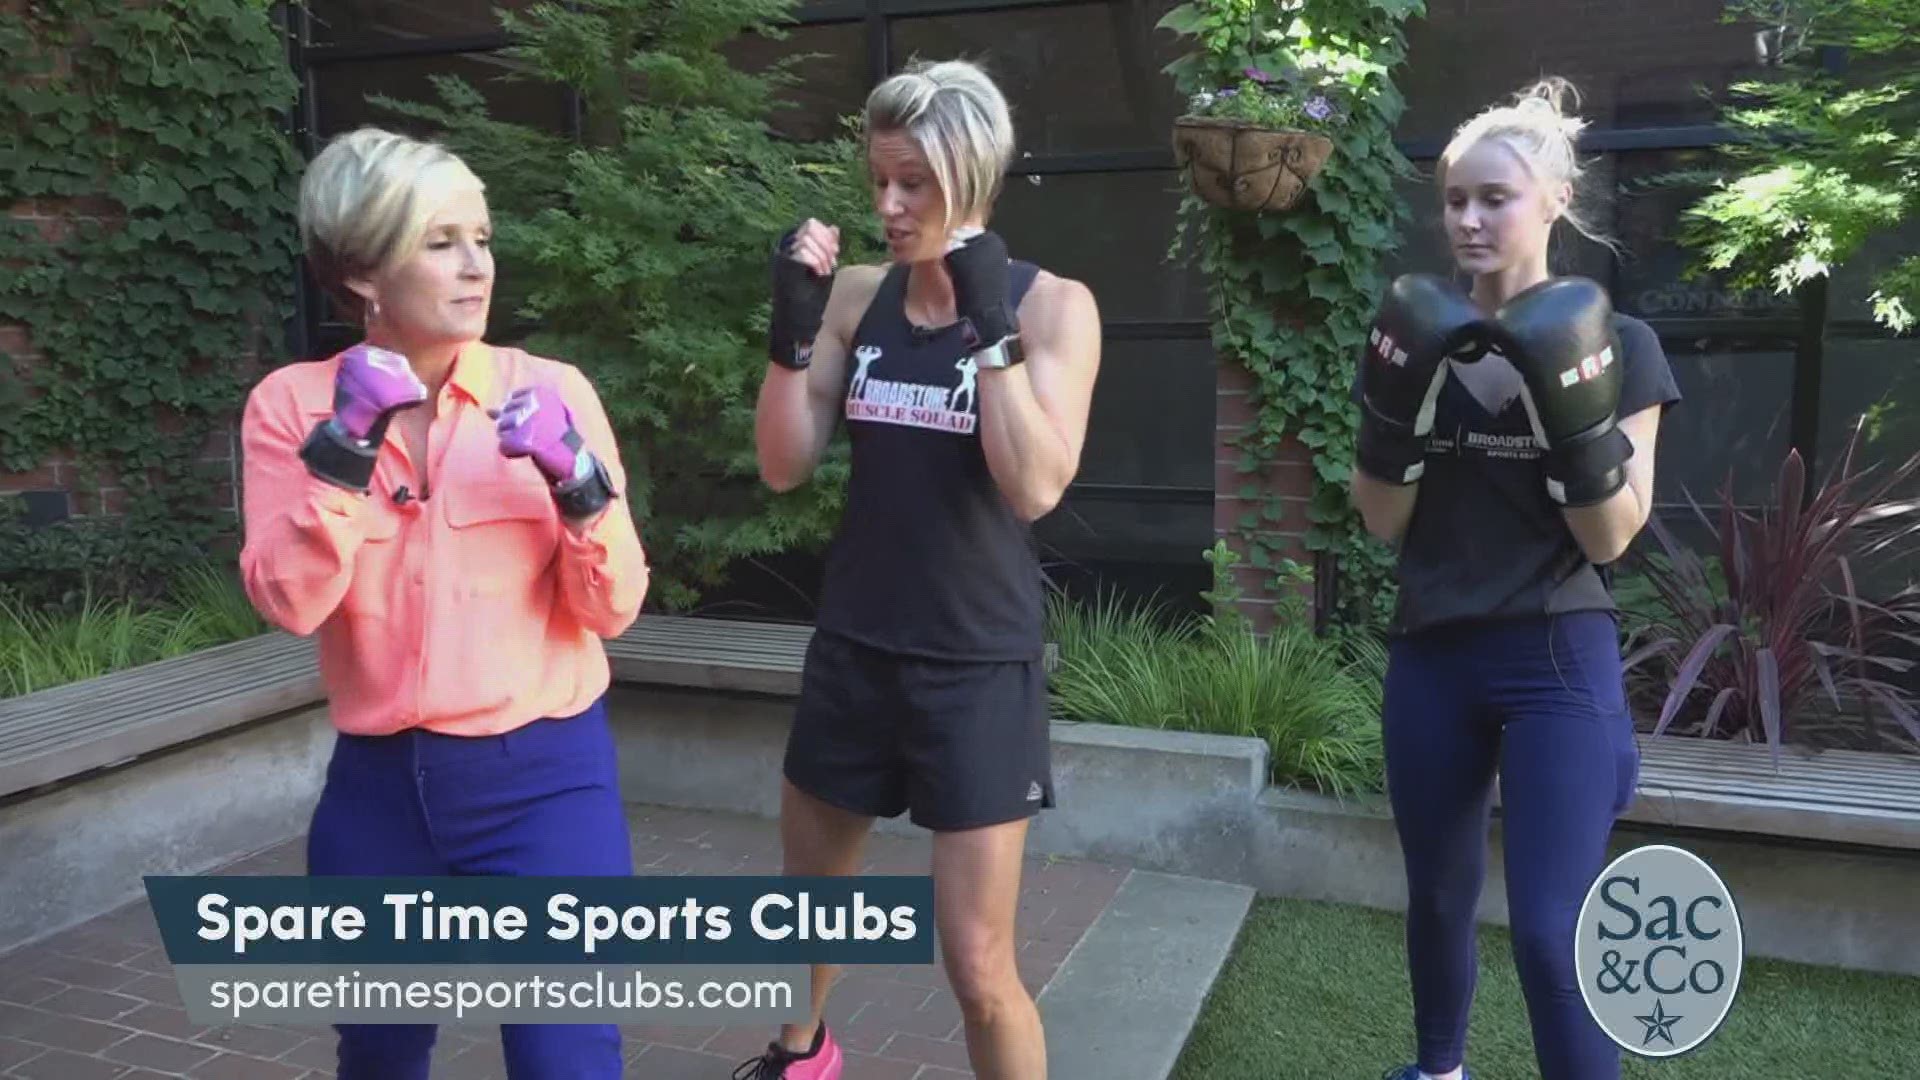 Join Melissa Crowley and Spare Time Sports in a fun boxing workout routine! The following is a paid segment sponsored by Spare Time Sports Clubs.